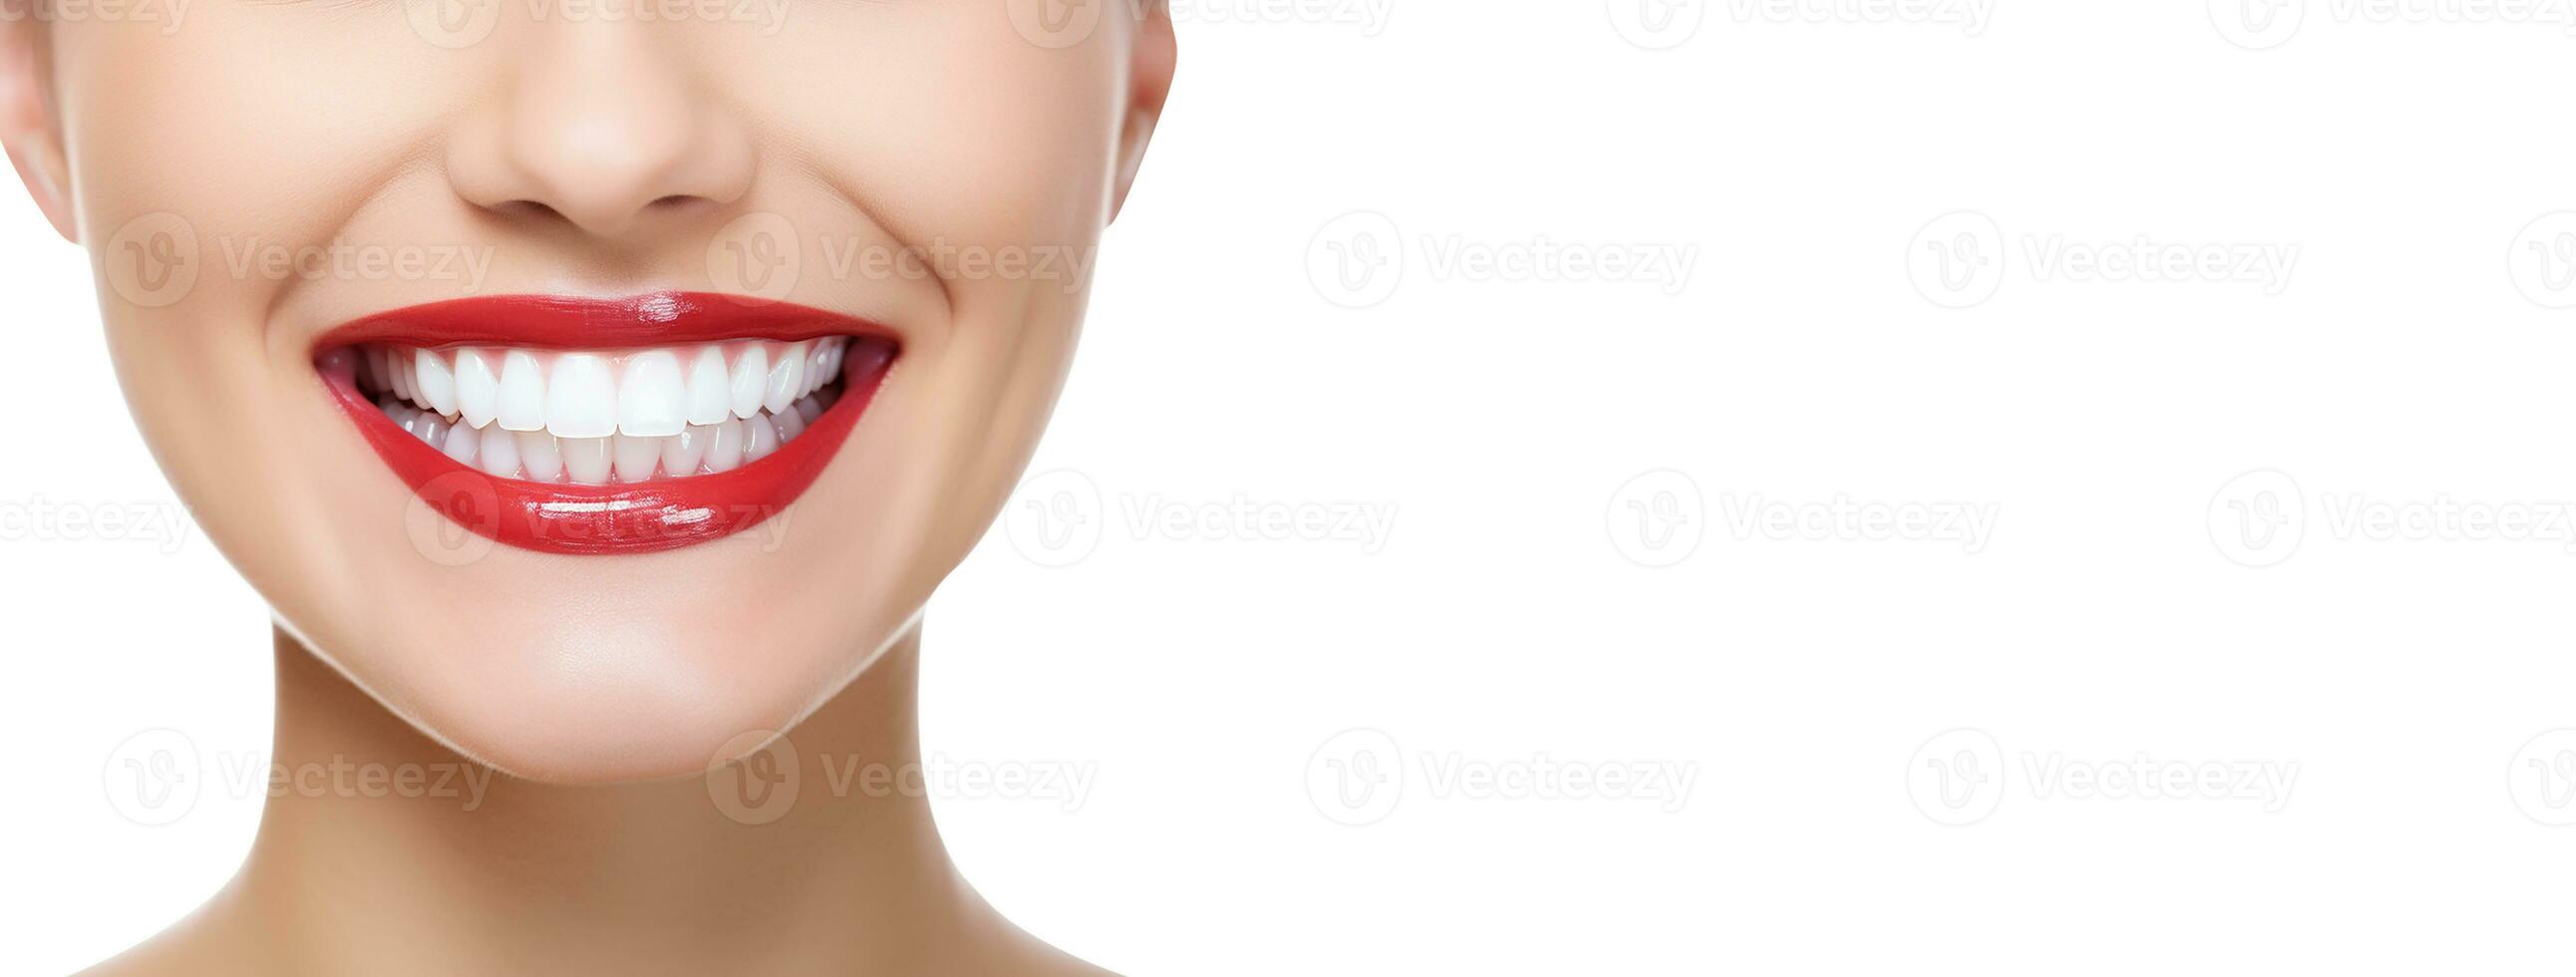 American smile. Woman smiling mouth with white teeth on white background with copy space. photo